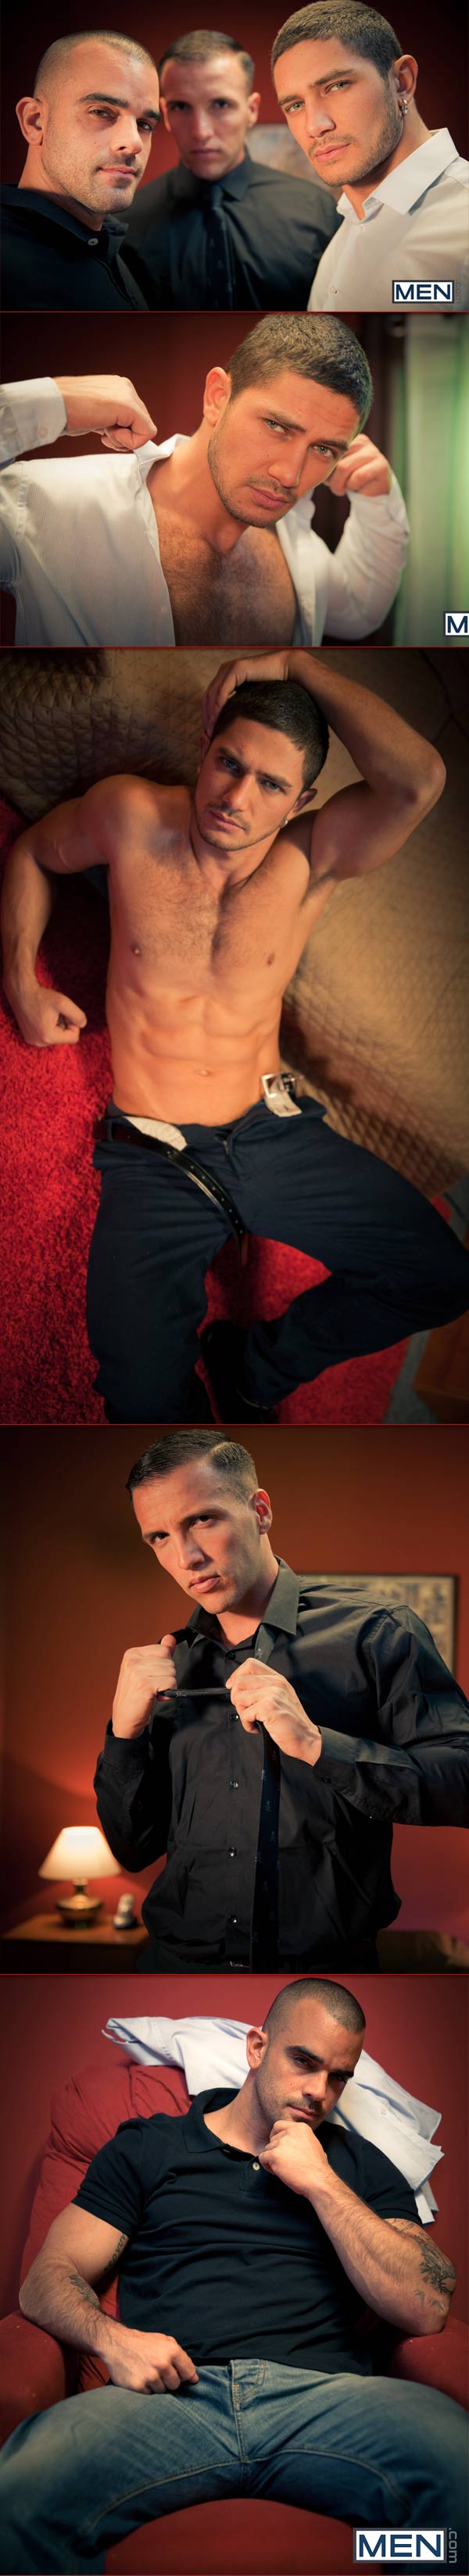 Hotel X (Dato Foland, Damien Crosse & Donato Reyes) (Part 4) at The Gay Office